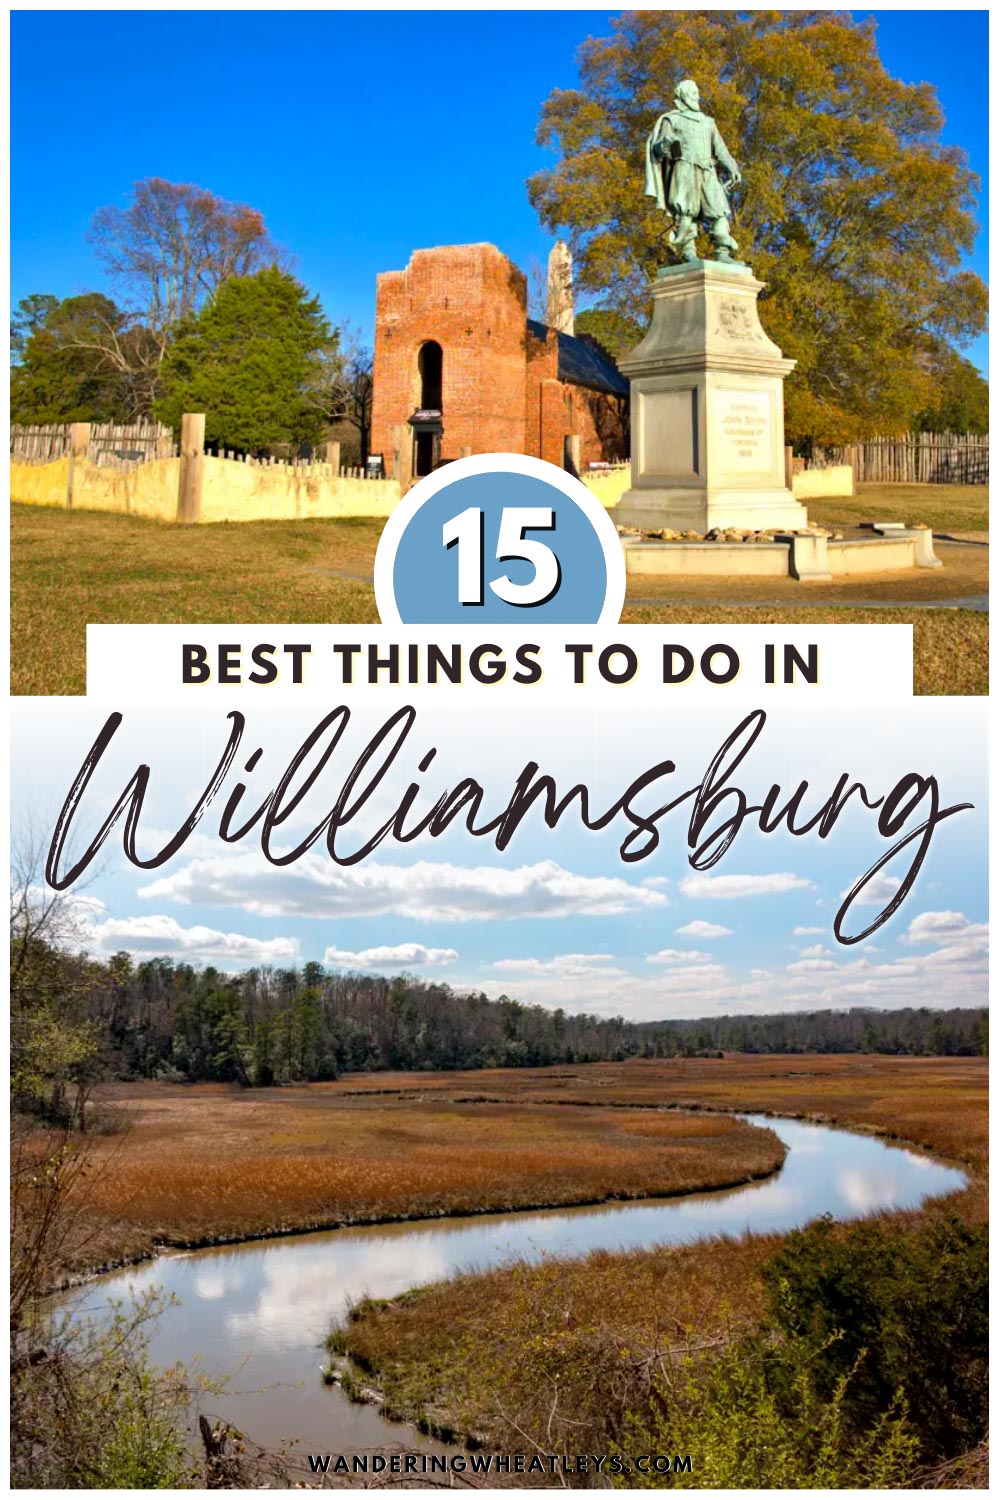 Best Things to do in Williamsburg